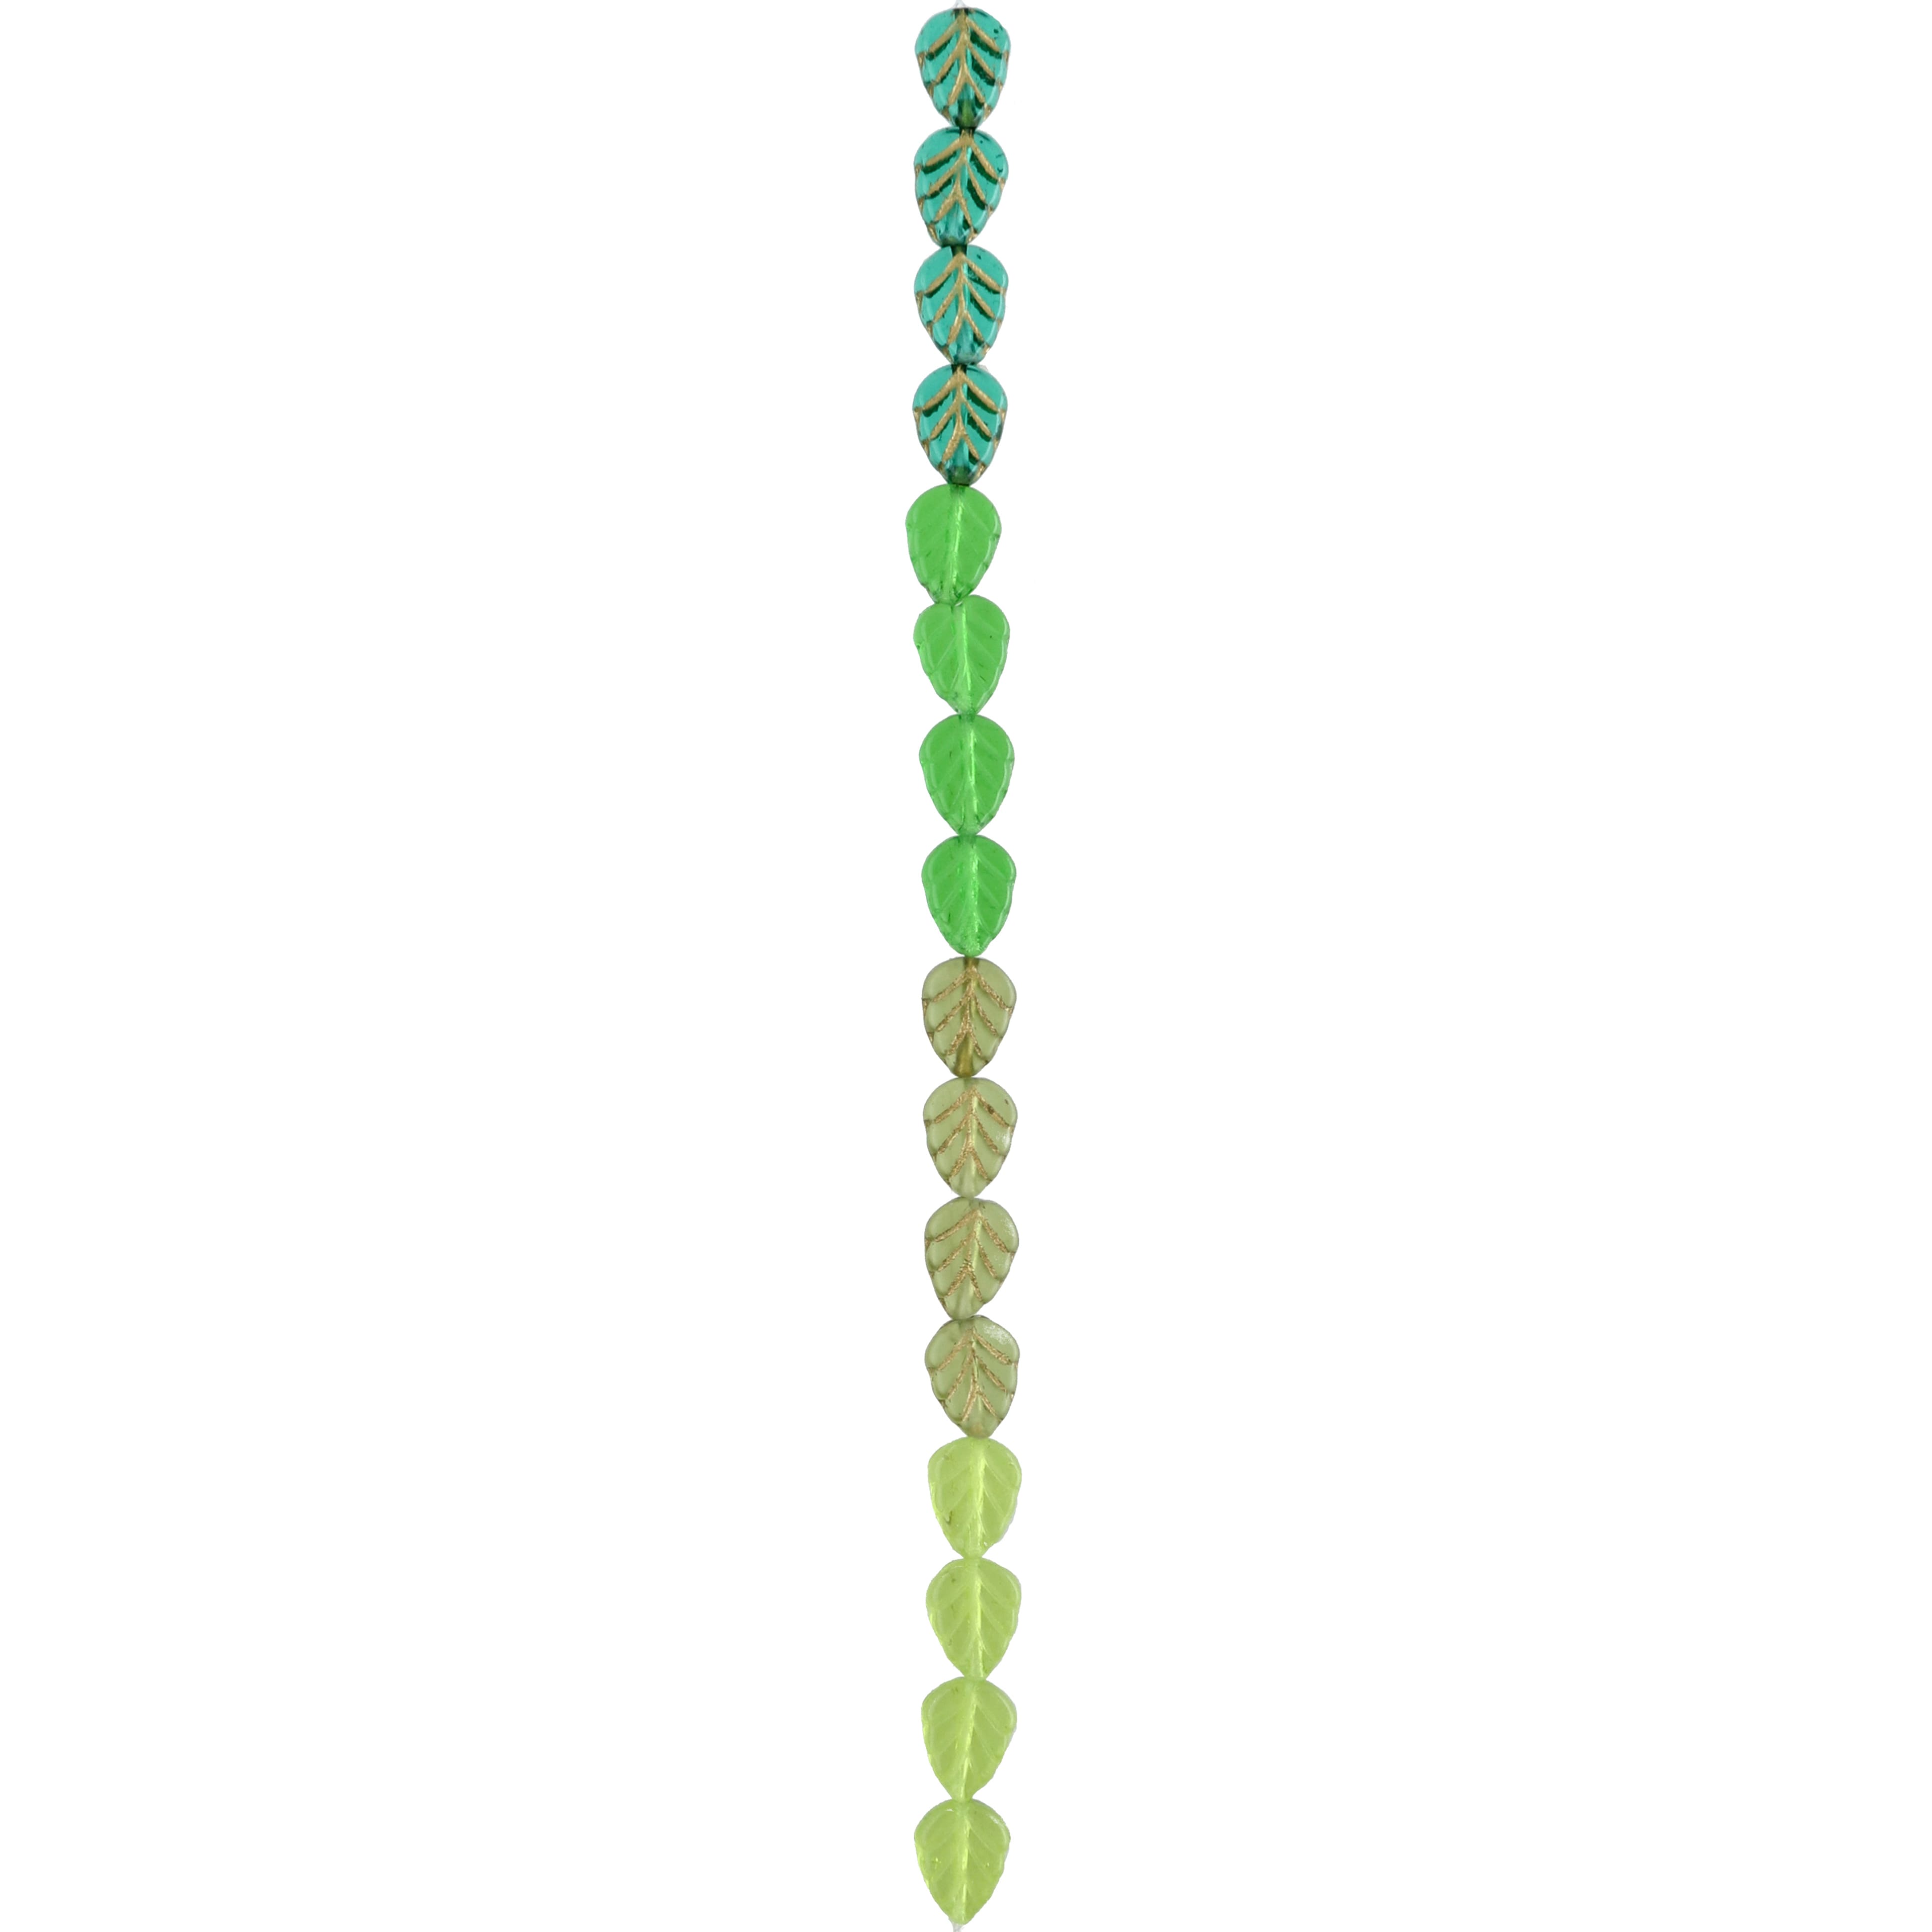 6 Packs: 16 ct. (96 total) Green Czech Glass Leaf Beads, 10.5mm by Bead Landing&#x2122;